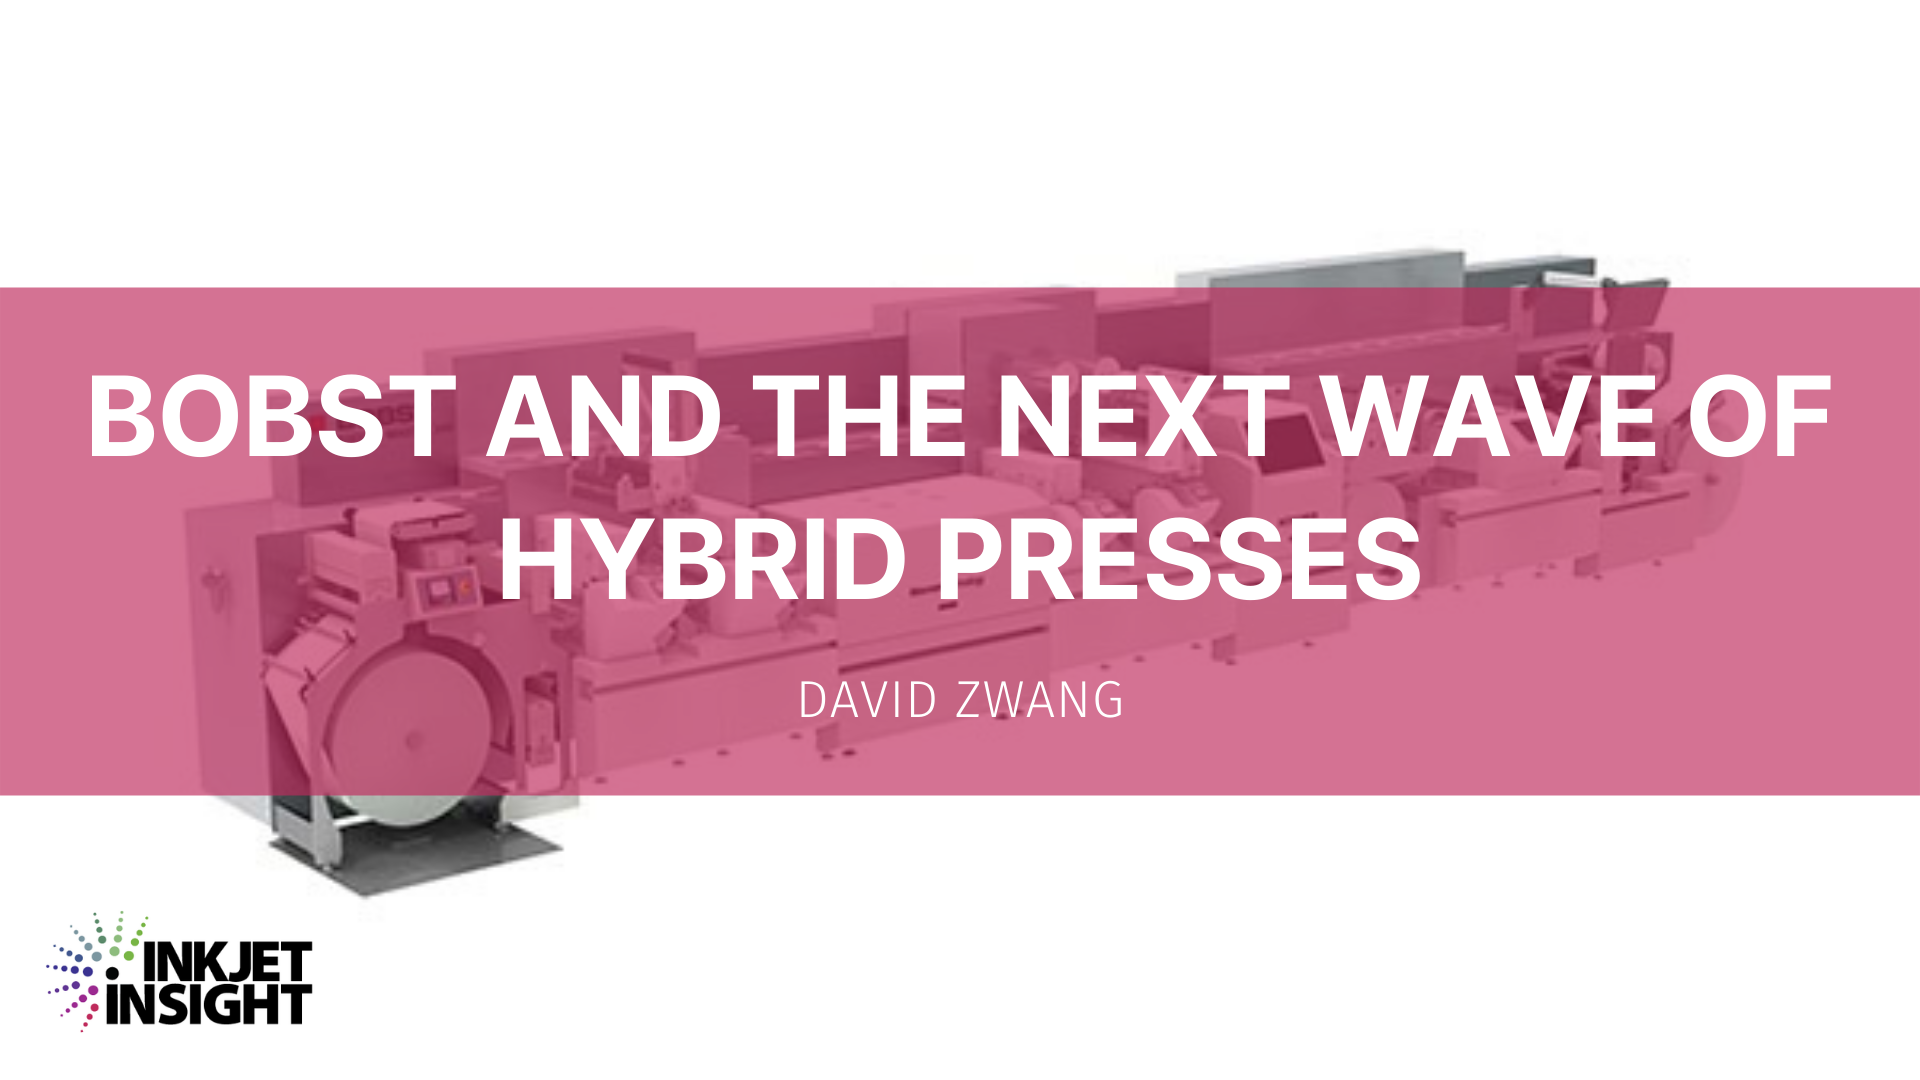 Featured image for “Bobst and the Next Wave of Hybrid Presses”